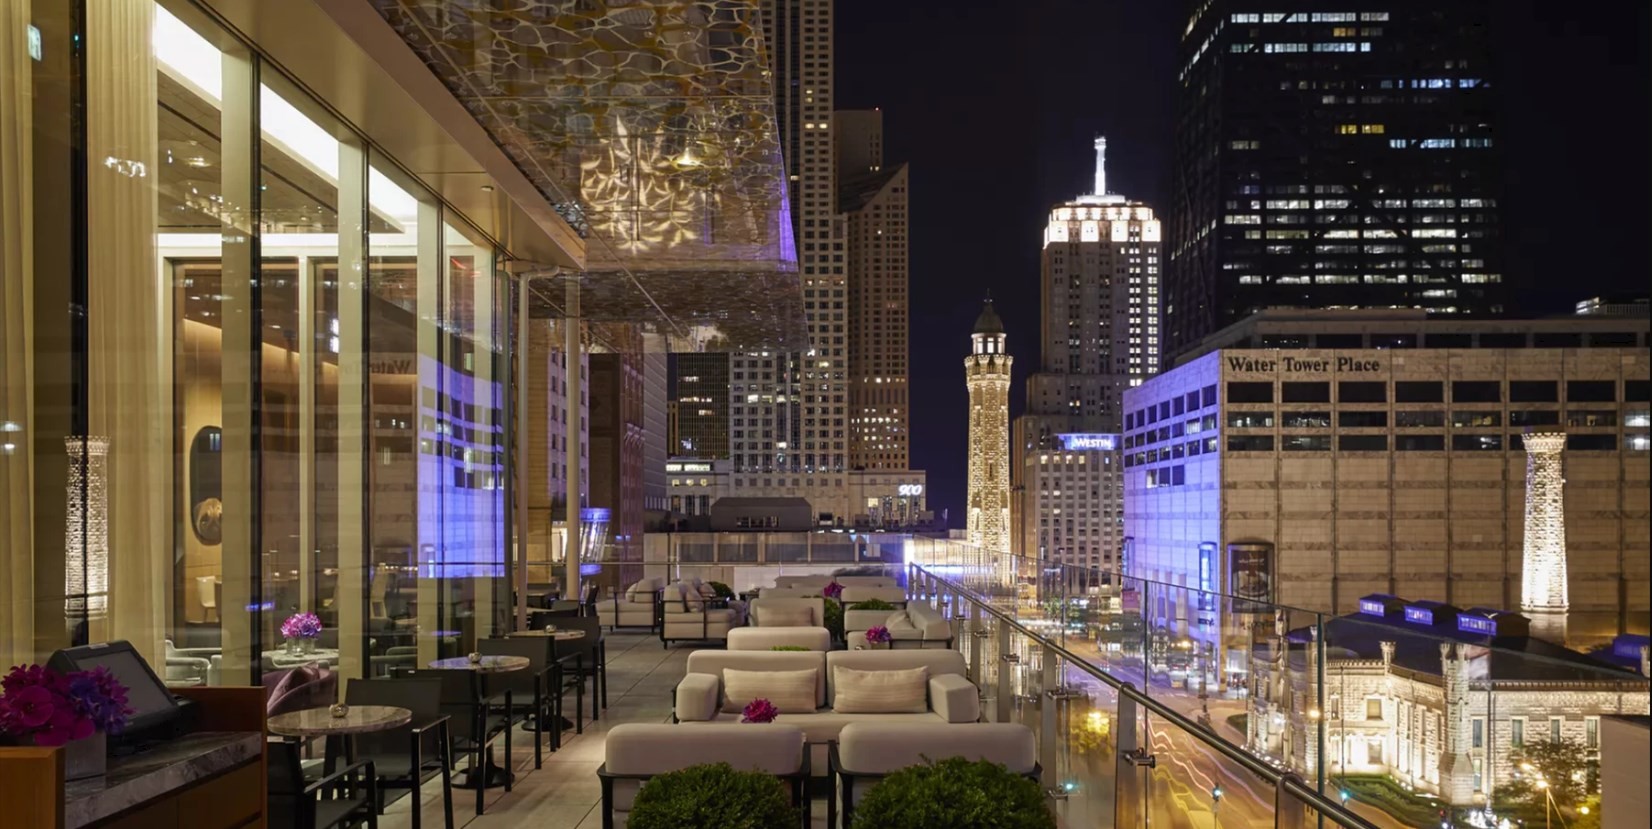 news-main-the-peninsula-hotels-in-chicago-beverly-hills-and-manila-achieve-worlds-best-hotel-bars-accolade-from-forbes-travel-guide.1572870880.jpg